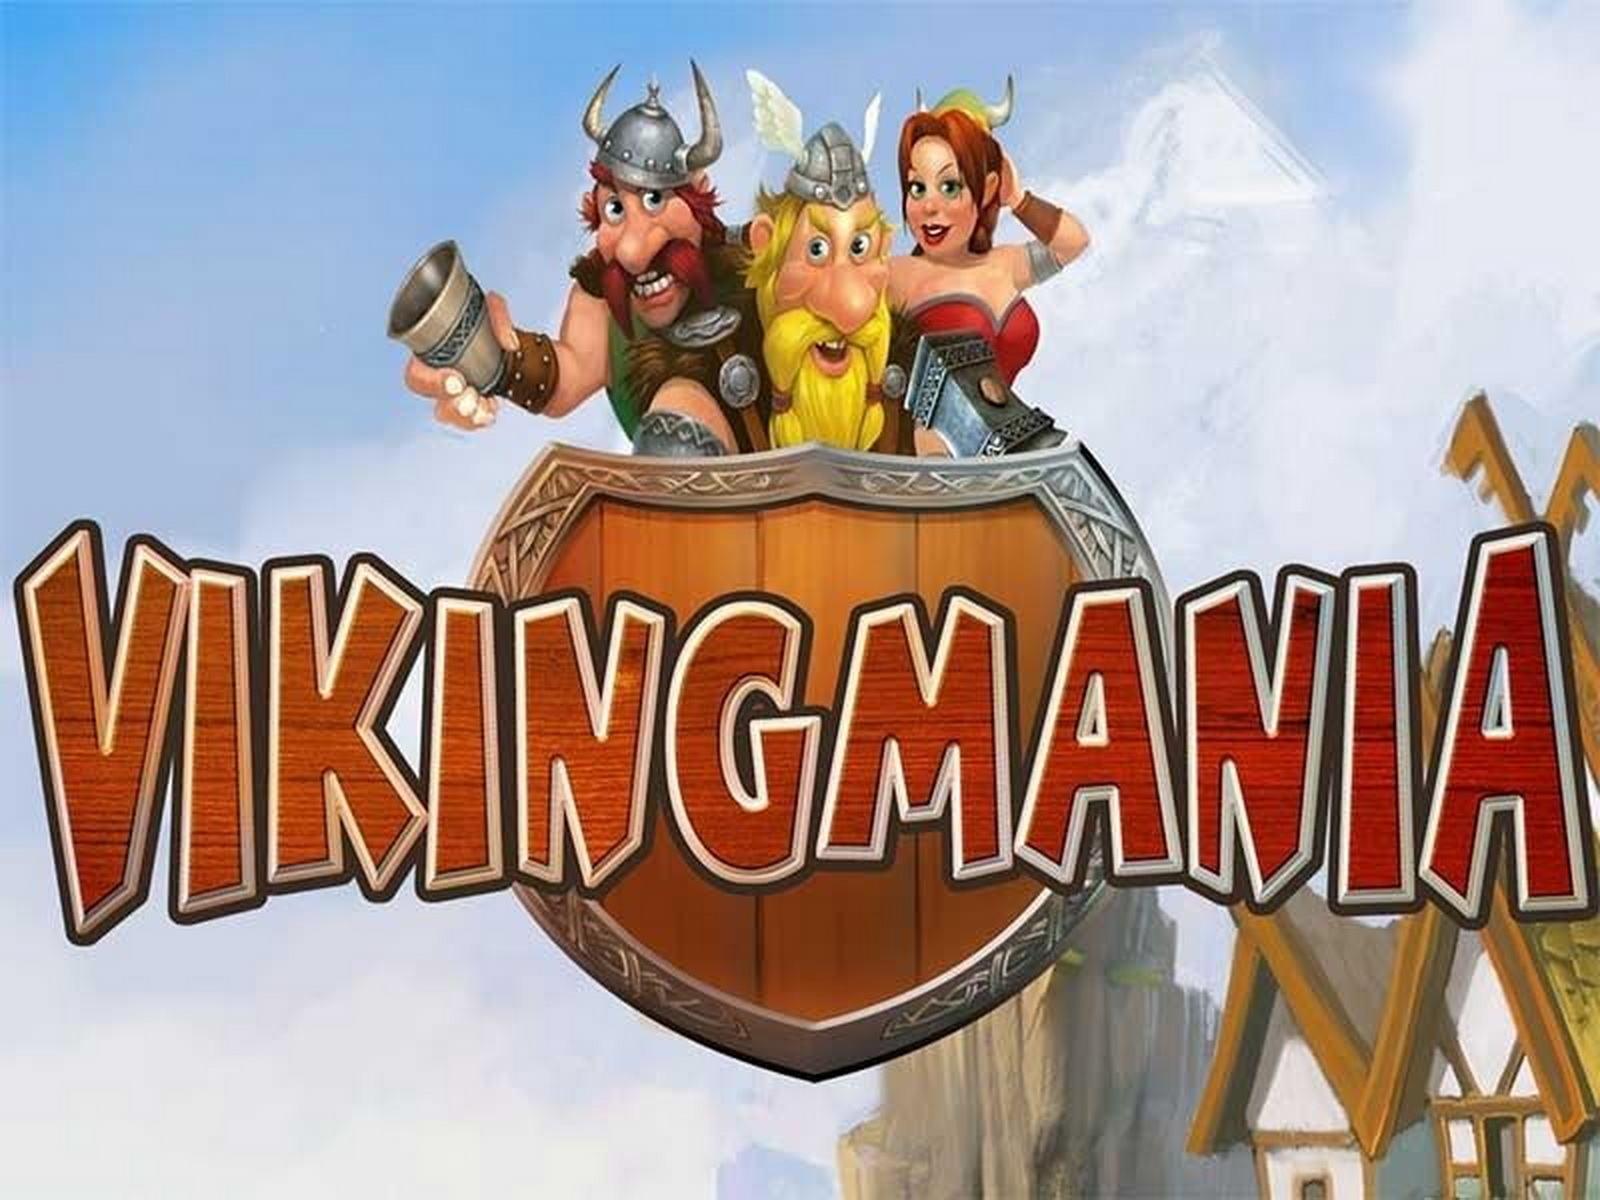 The Vikingmania Online Slot Demo Game by Playtech